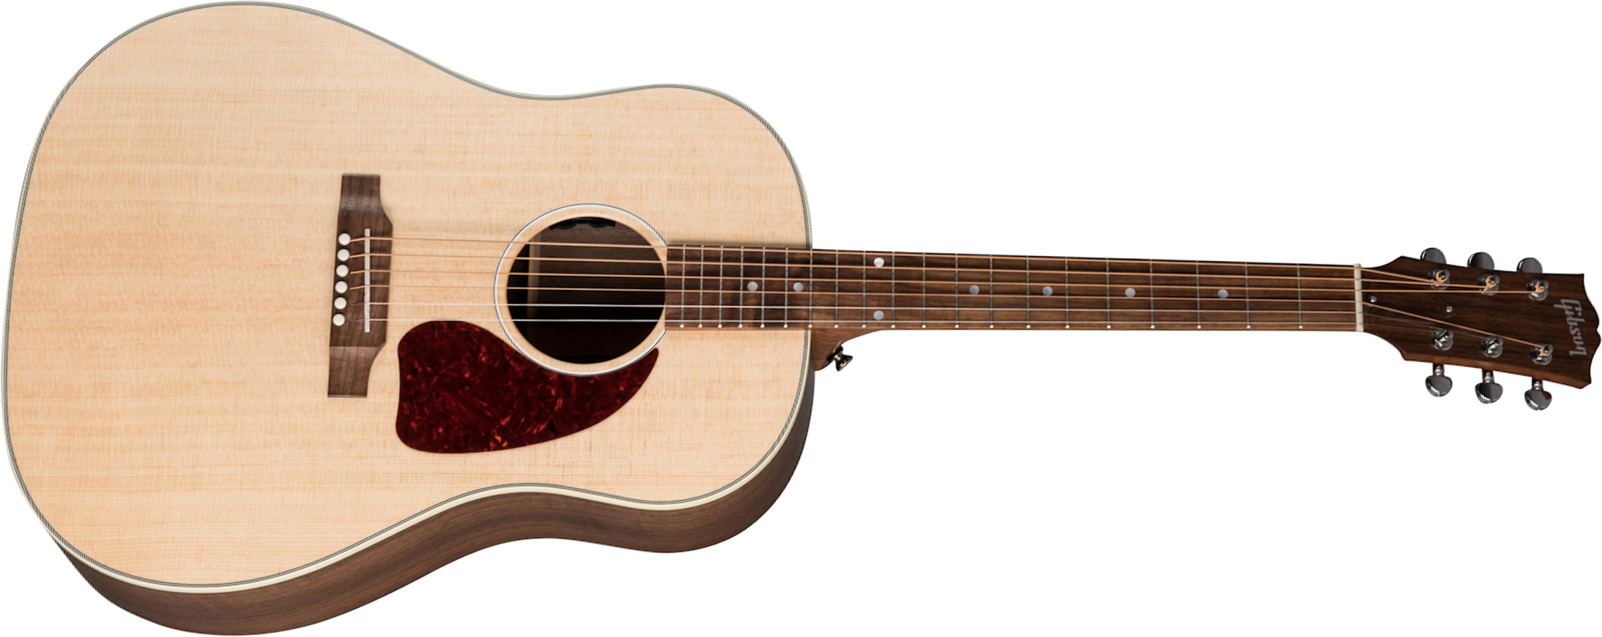 Gibson G-45 Studio Generation Dreadnought Epicea Noyer Wal - Antique Natural Satin - Electro acoustic guitar - Main picture